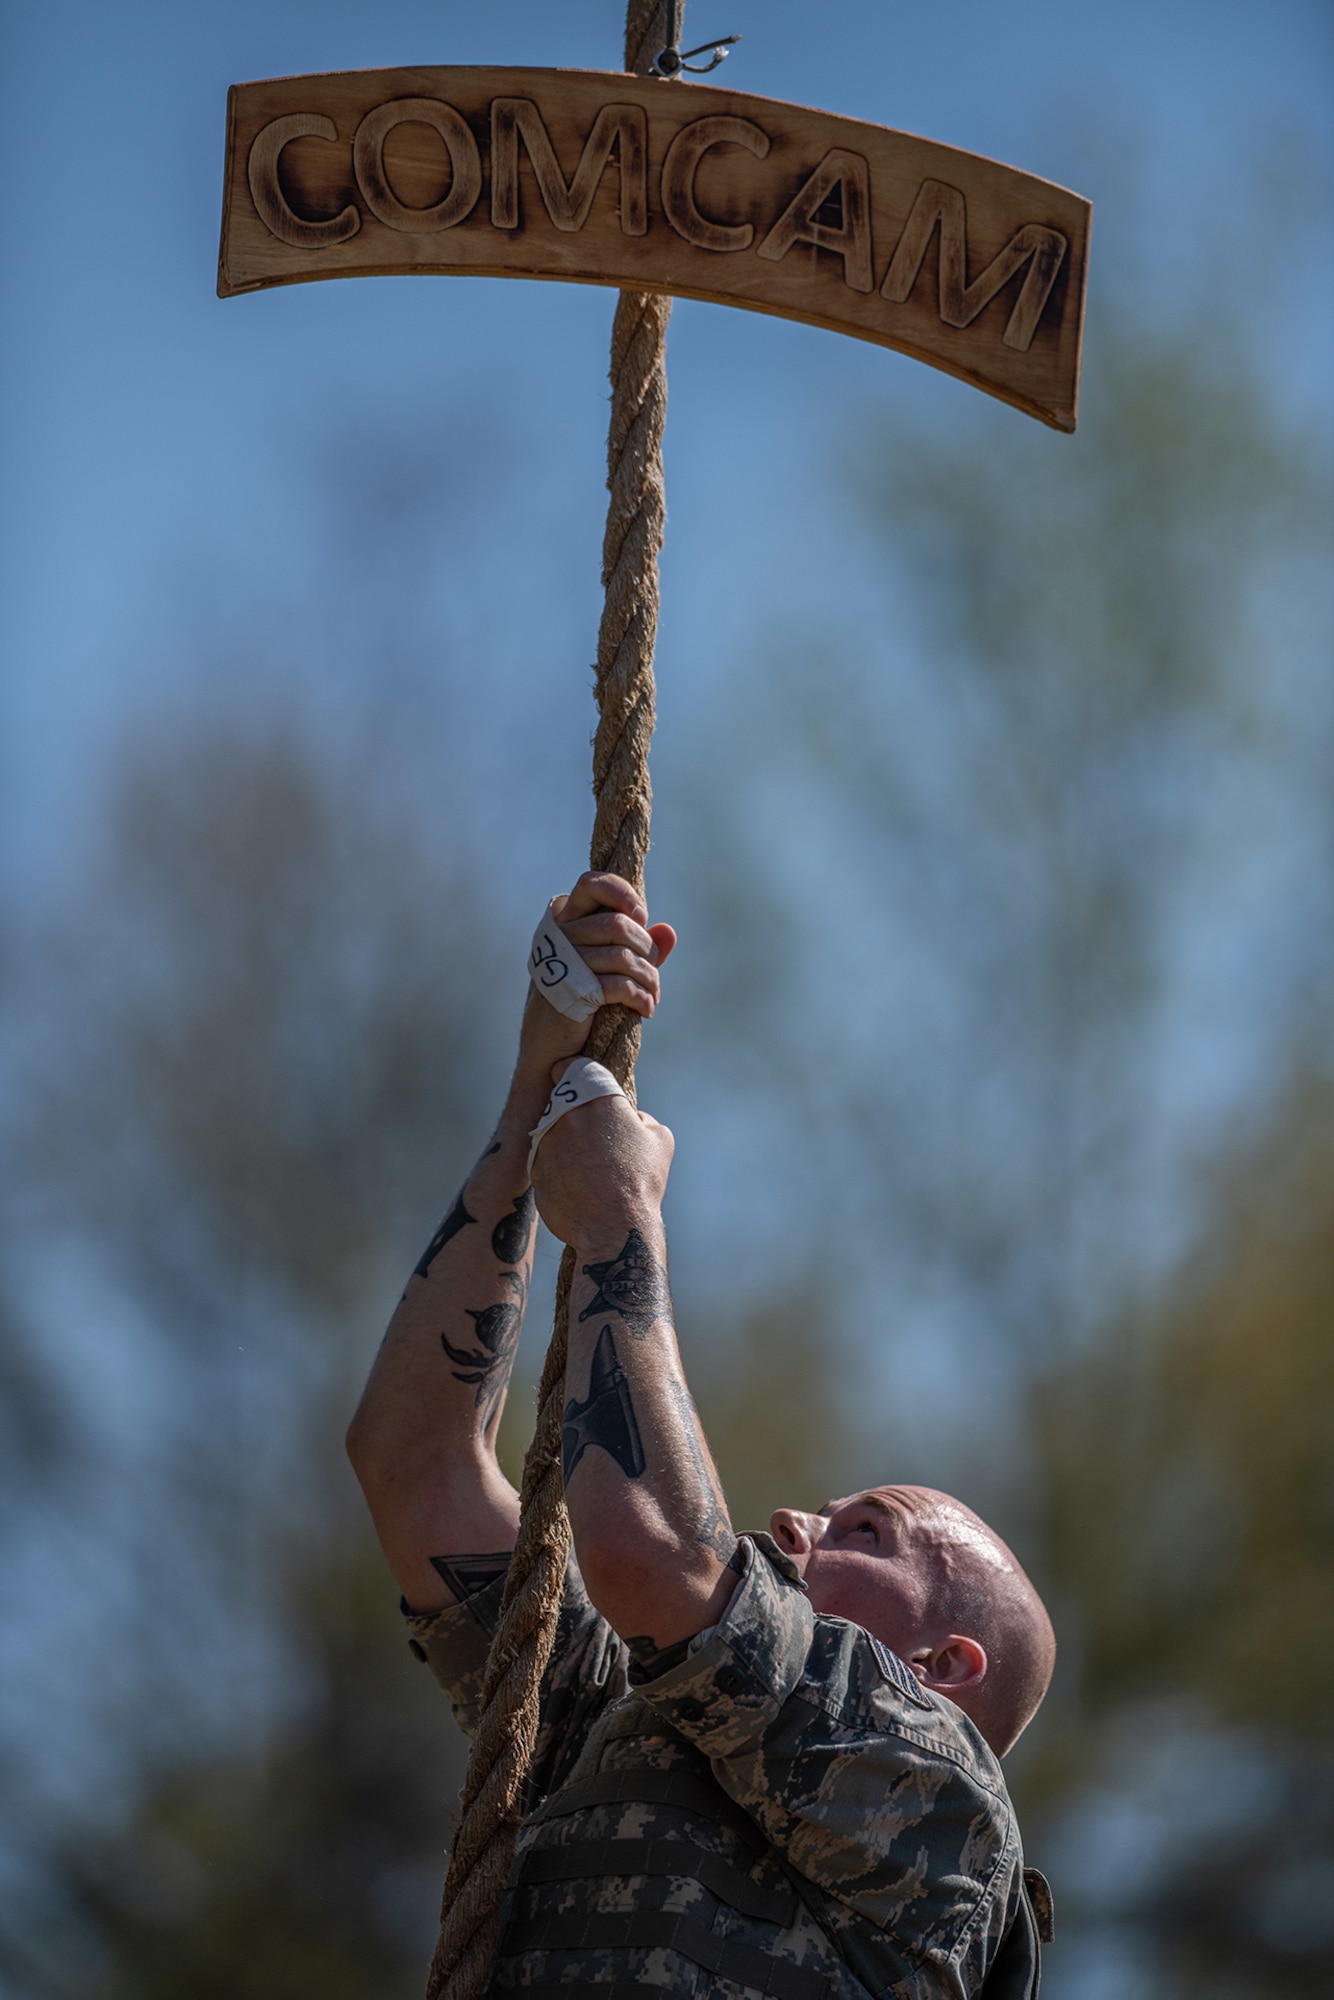 Staff Sgt. Corban Lundborg, assigned to 4th Combat Camera Squadron, climbs a rope during the obstacle course portion of the 2018 SPC Hilda I. Clayton Best Combat Camera Competition at Marine Corps Base Quantico, Va., May 1, 2018. The competition is an annual event open to all branches of the military, it’s hosted by the 55th Signal Company (Combat Camera) in order to test the technical and tactical proficiencies of Defense Department combat photographers. (U.S. Army photo by Staff Sgt. Pablo N. Piedra)